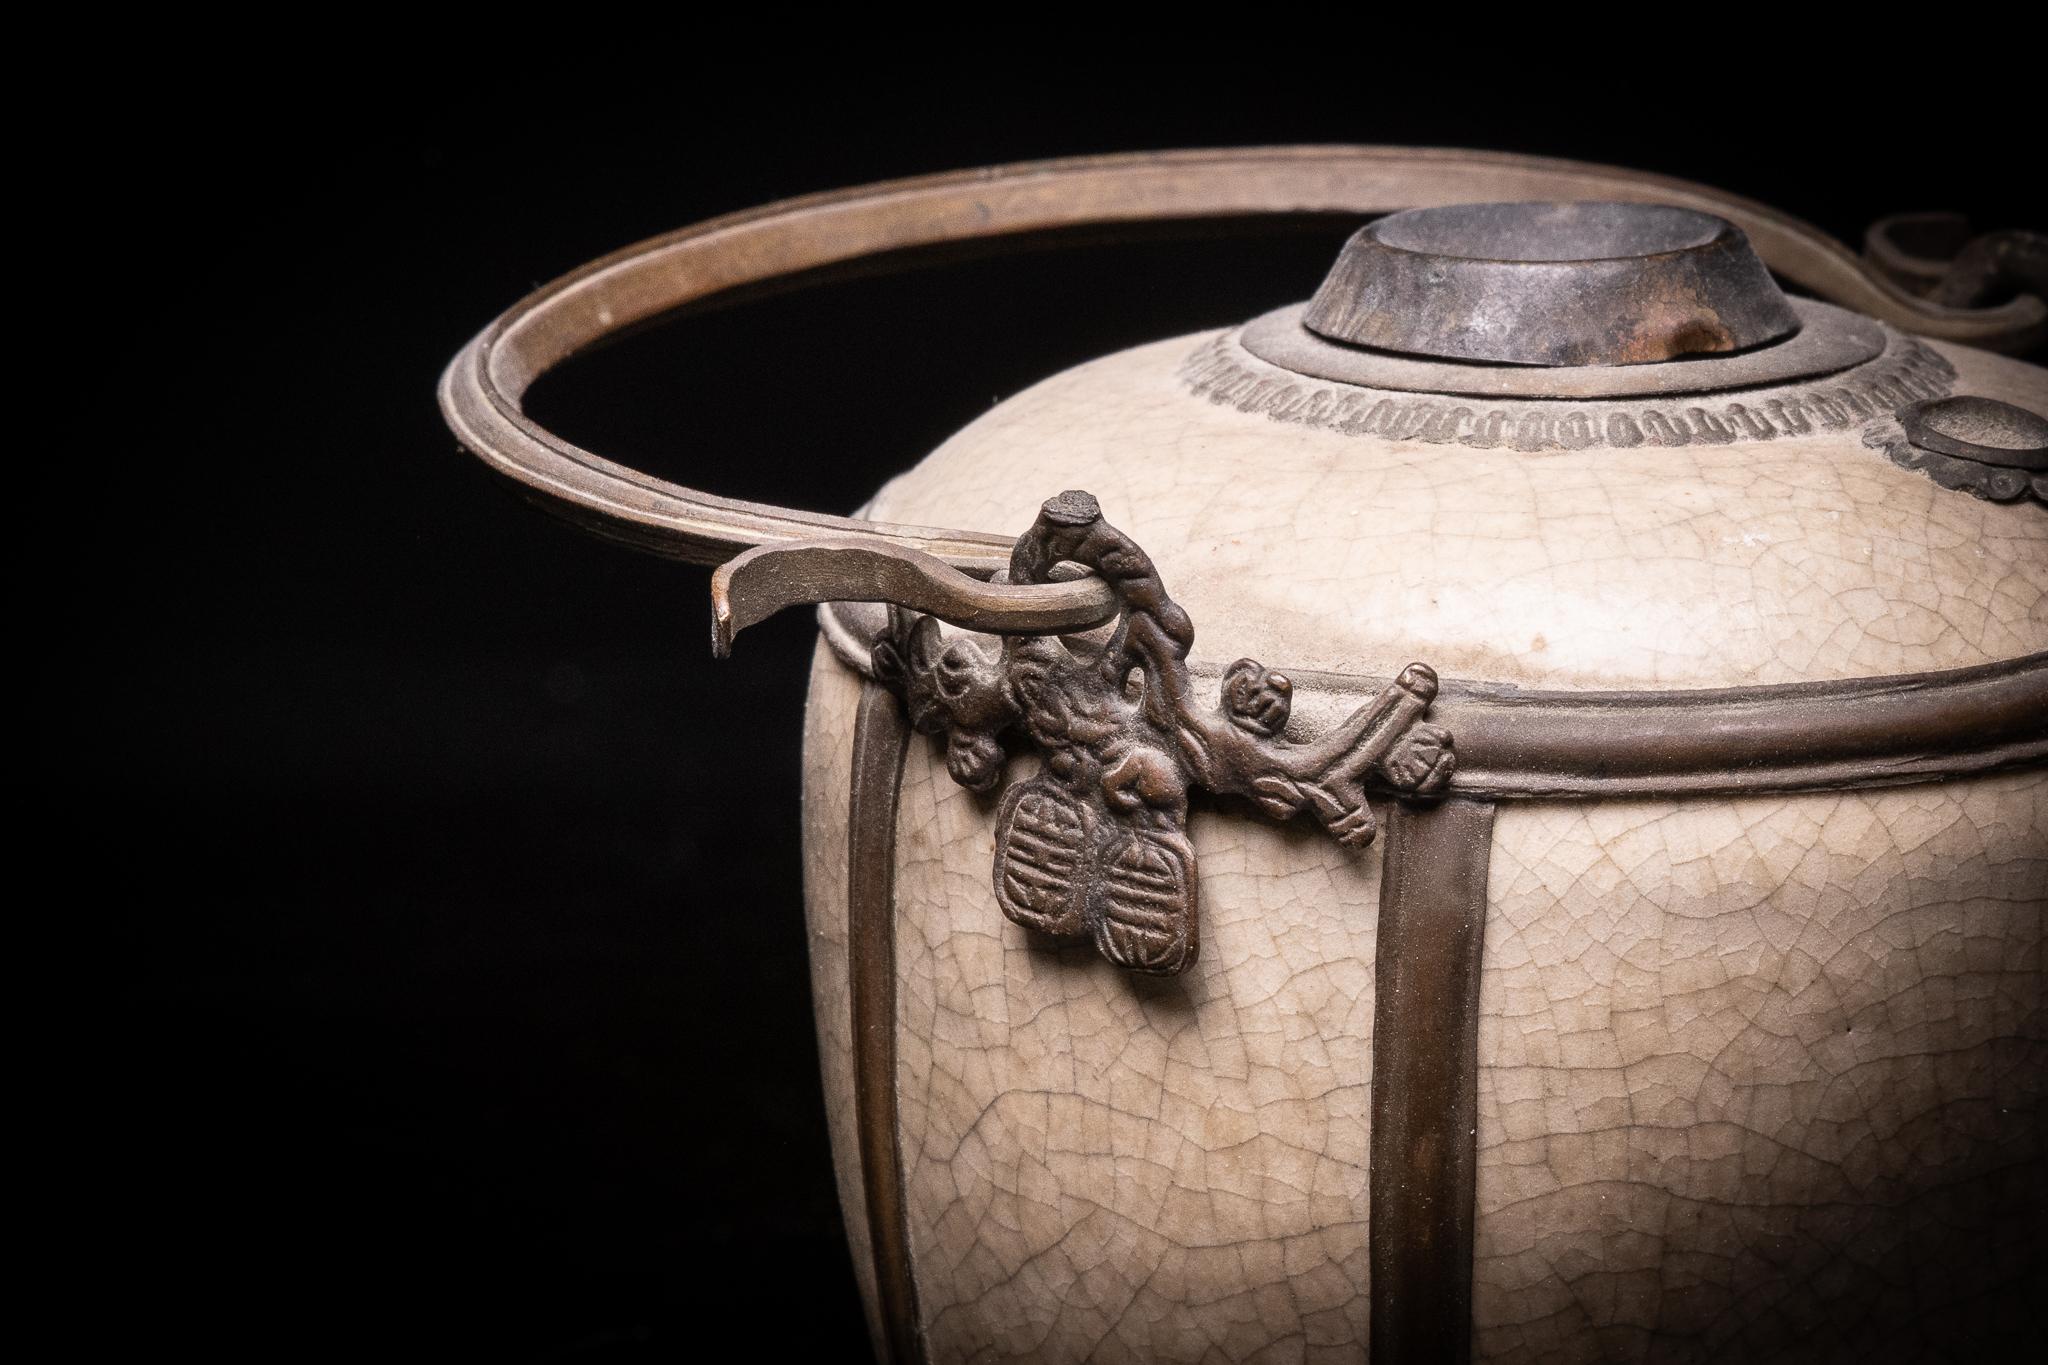 The bowl of the Vietnamese water pipe is jar-shaped. The metal handle allows easy carrying and moving of the object. The pipe stem that is normally places in the water tank, is missing. The craquelure or fine pattern of cracking is intentional and